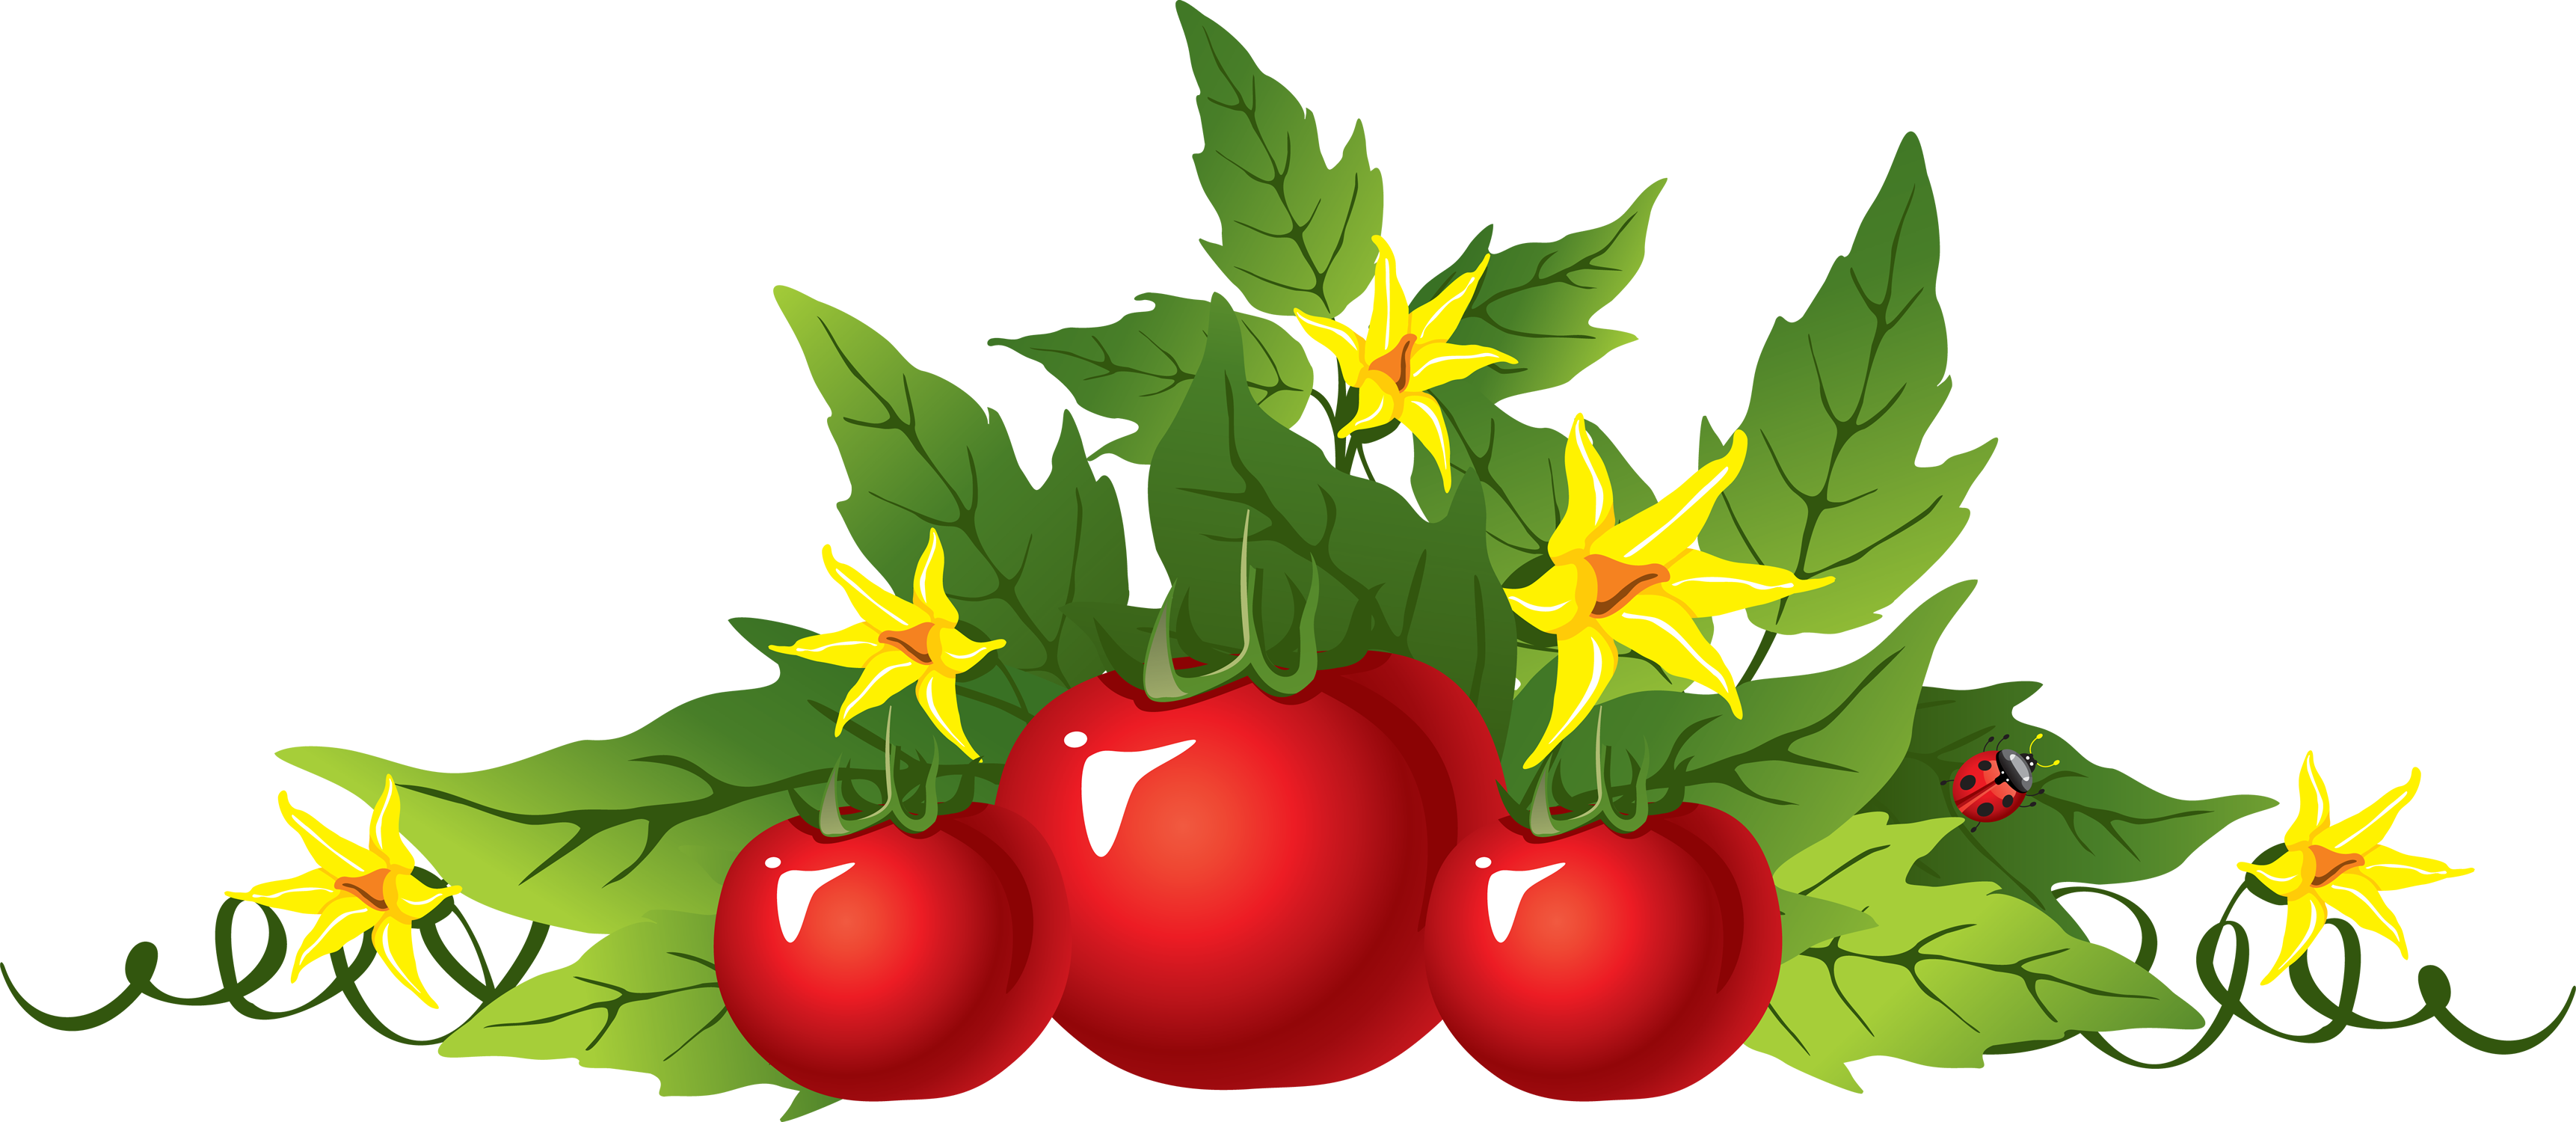 Tomato picture PNG transparent background